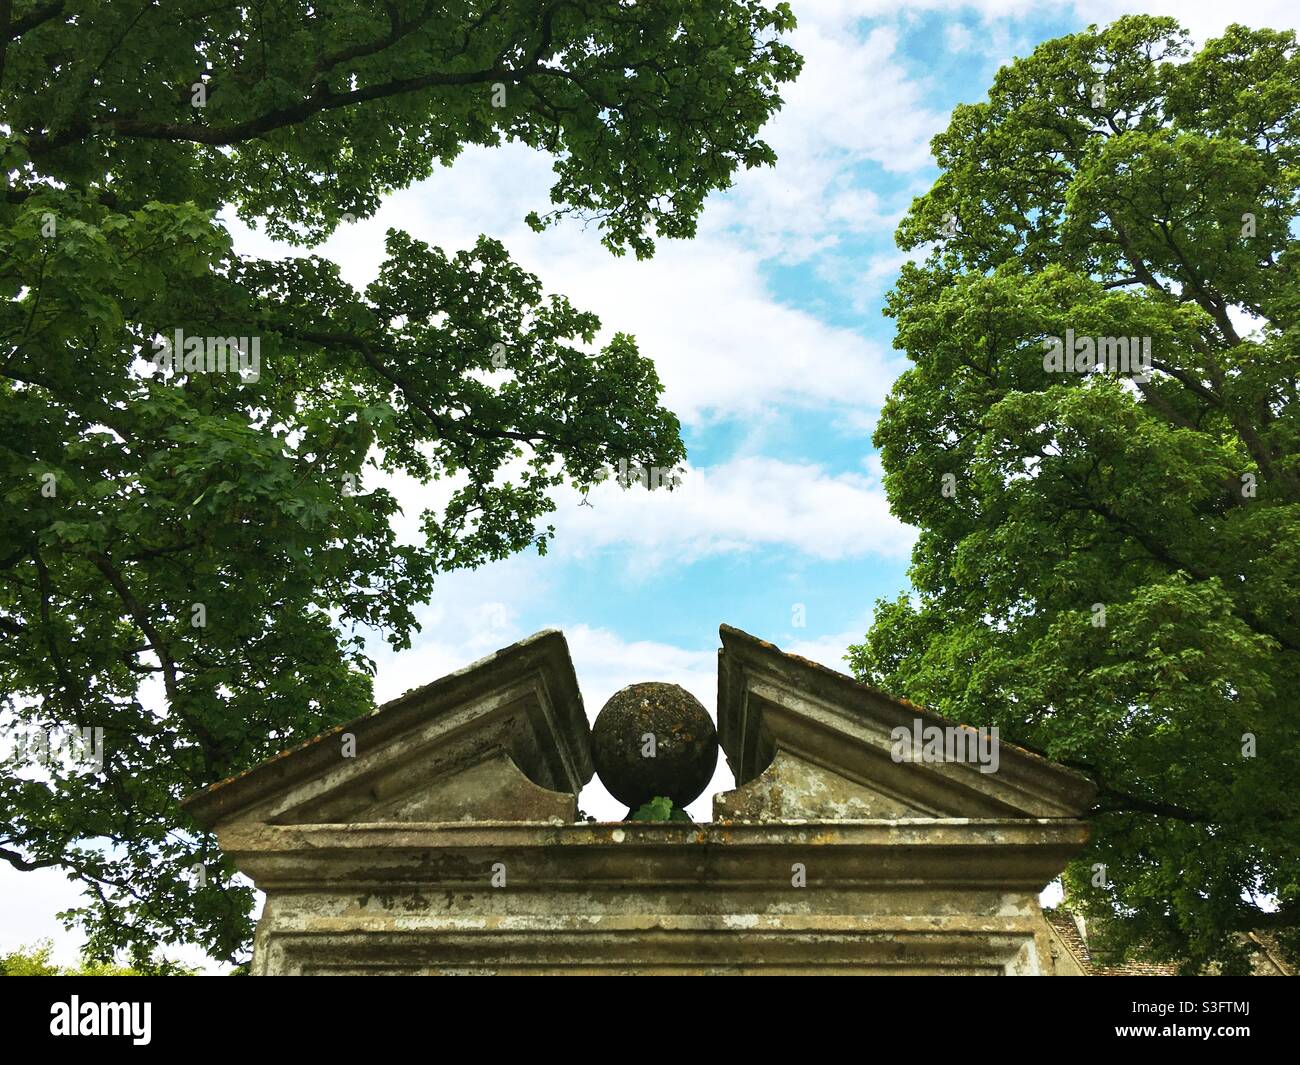 Top of the Garden Gate East of Avebury Manor, Wiltshire, UK. Made from limestone, the gateway was made in the early to mid 18th century and is a Grade II Listed Building. Stock Photo